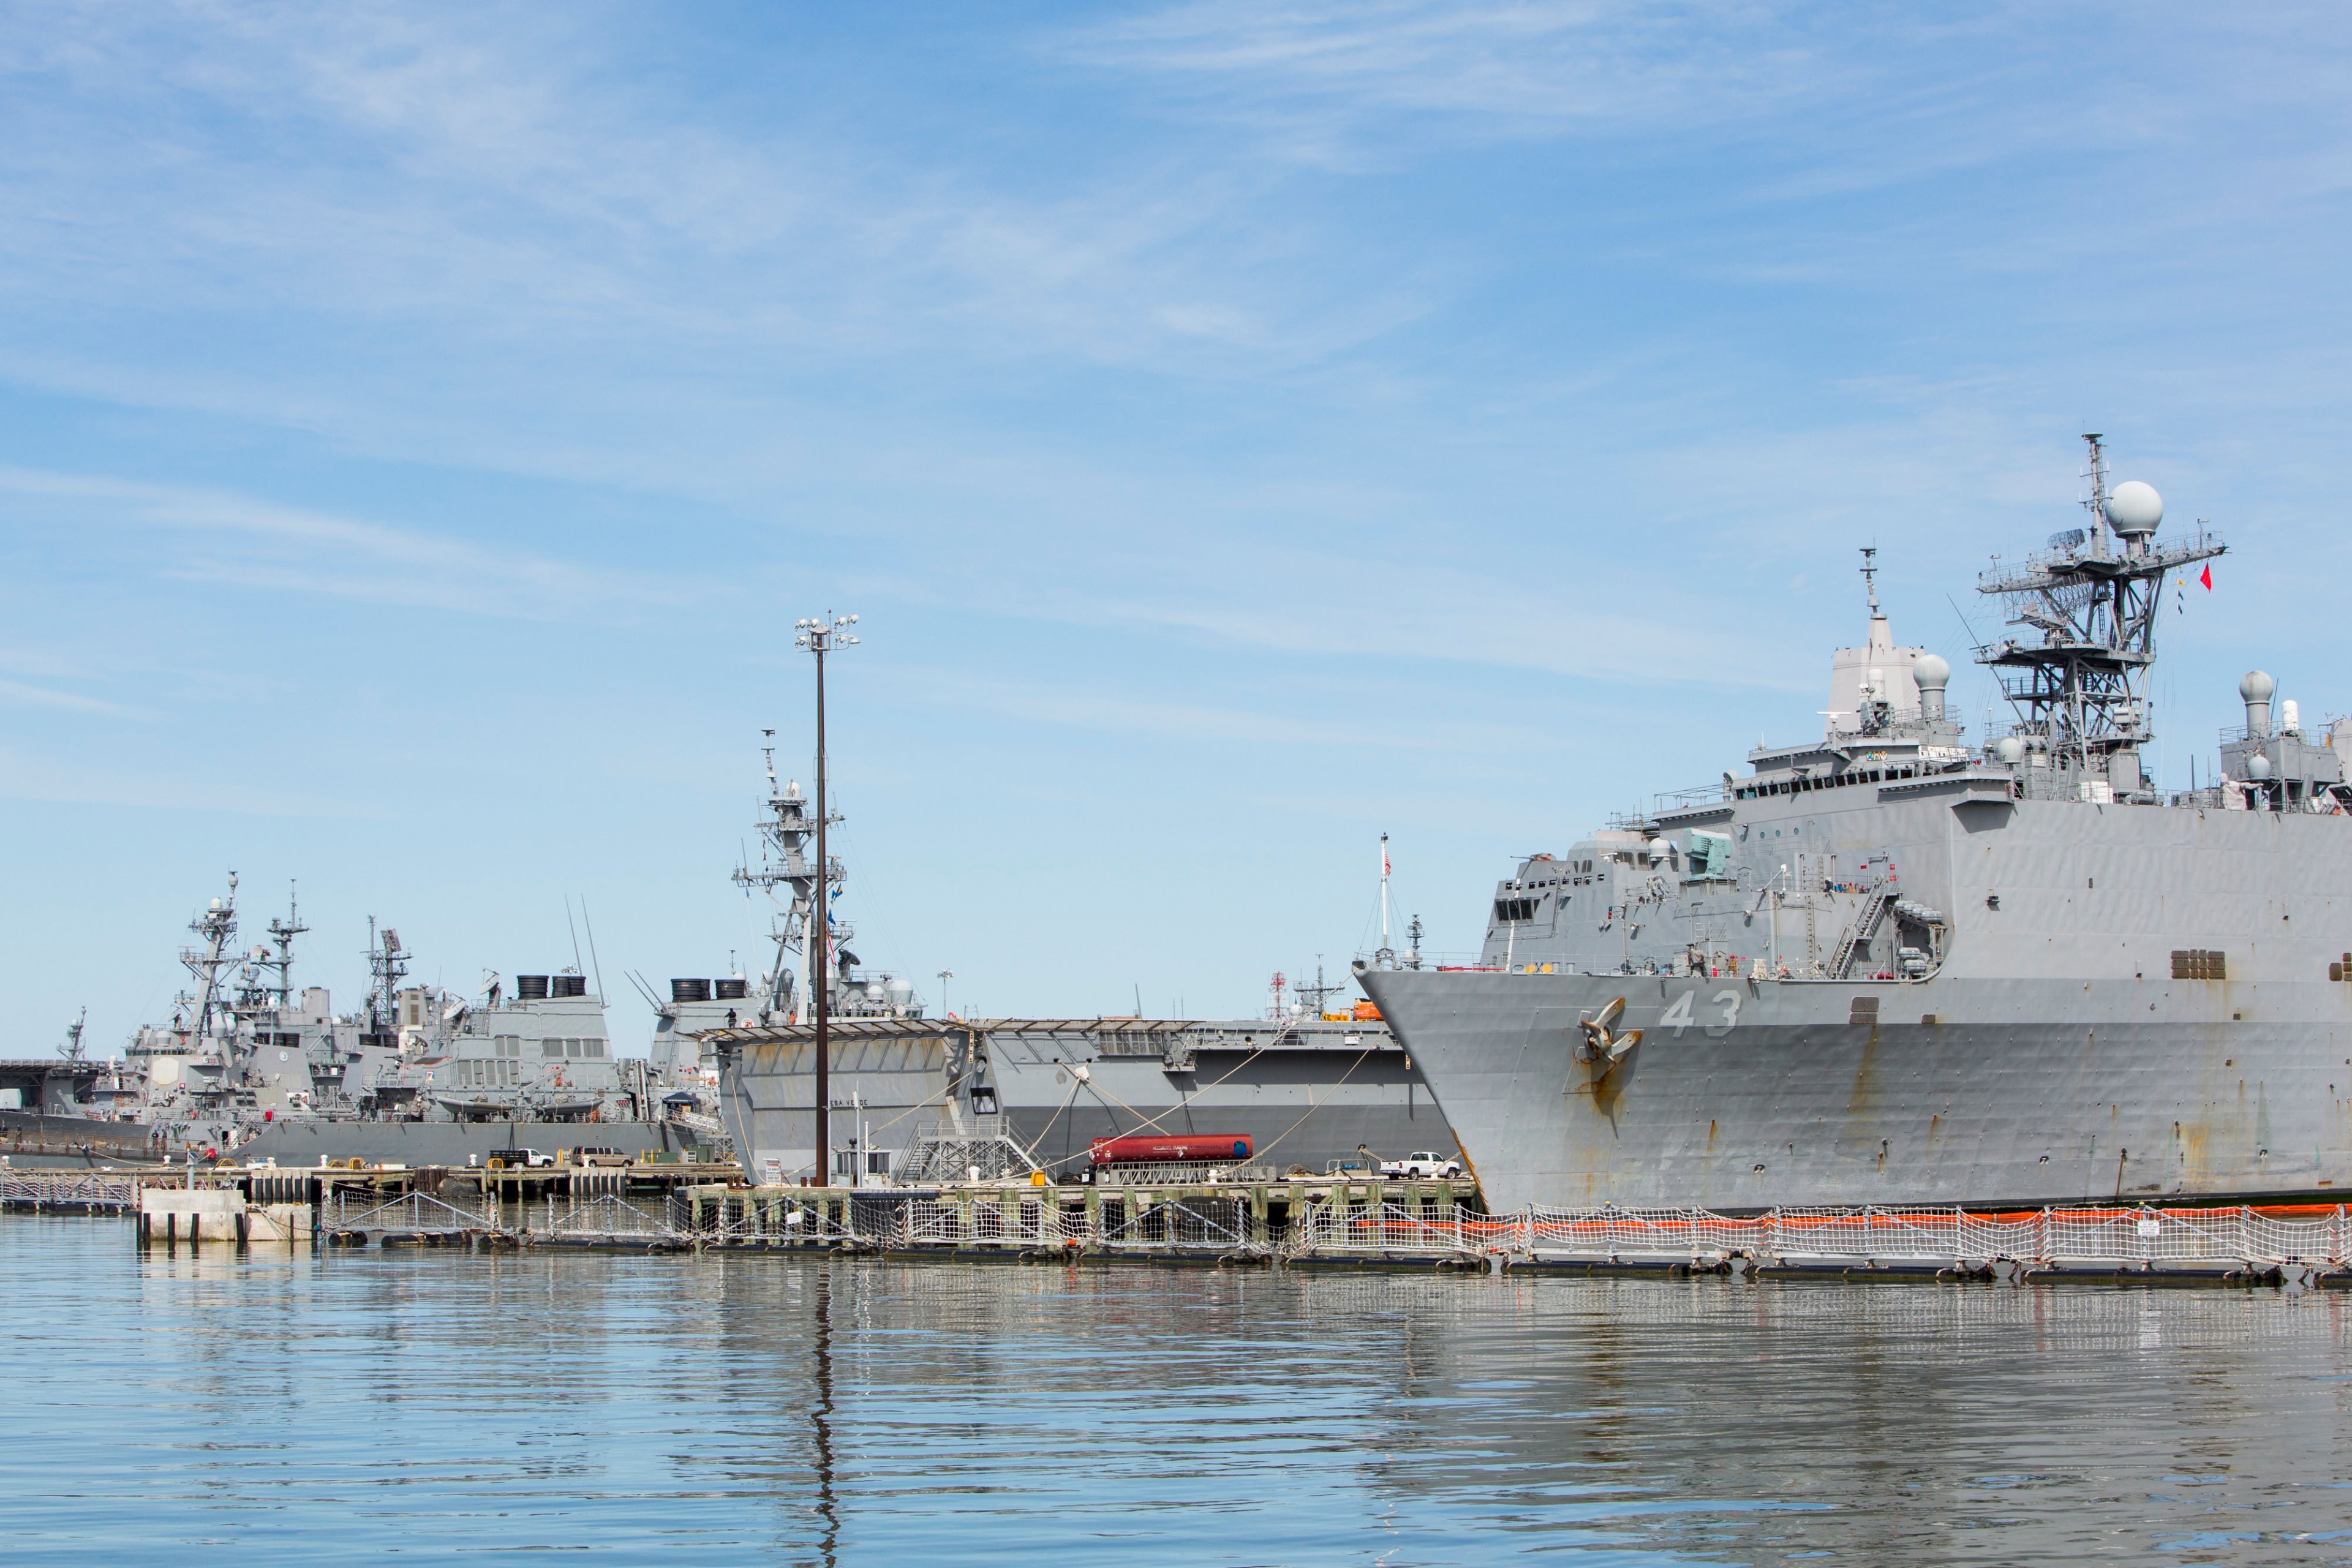 Tour the world’s largest naval complex and see some of the U.S. Navy’s most powerful ships.